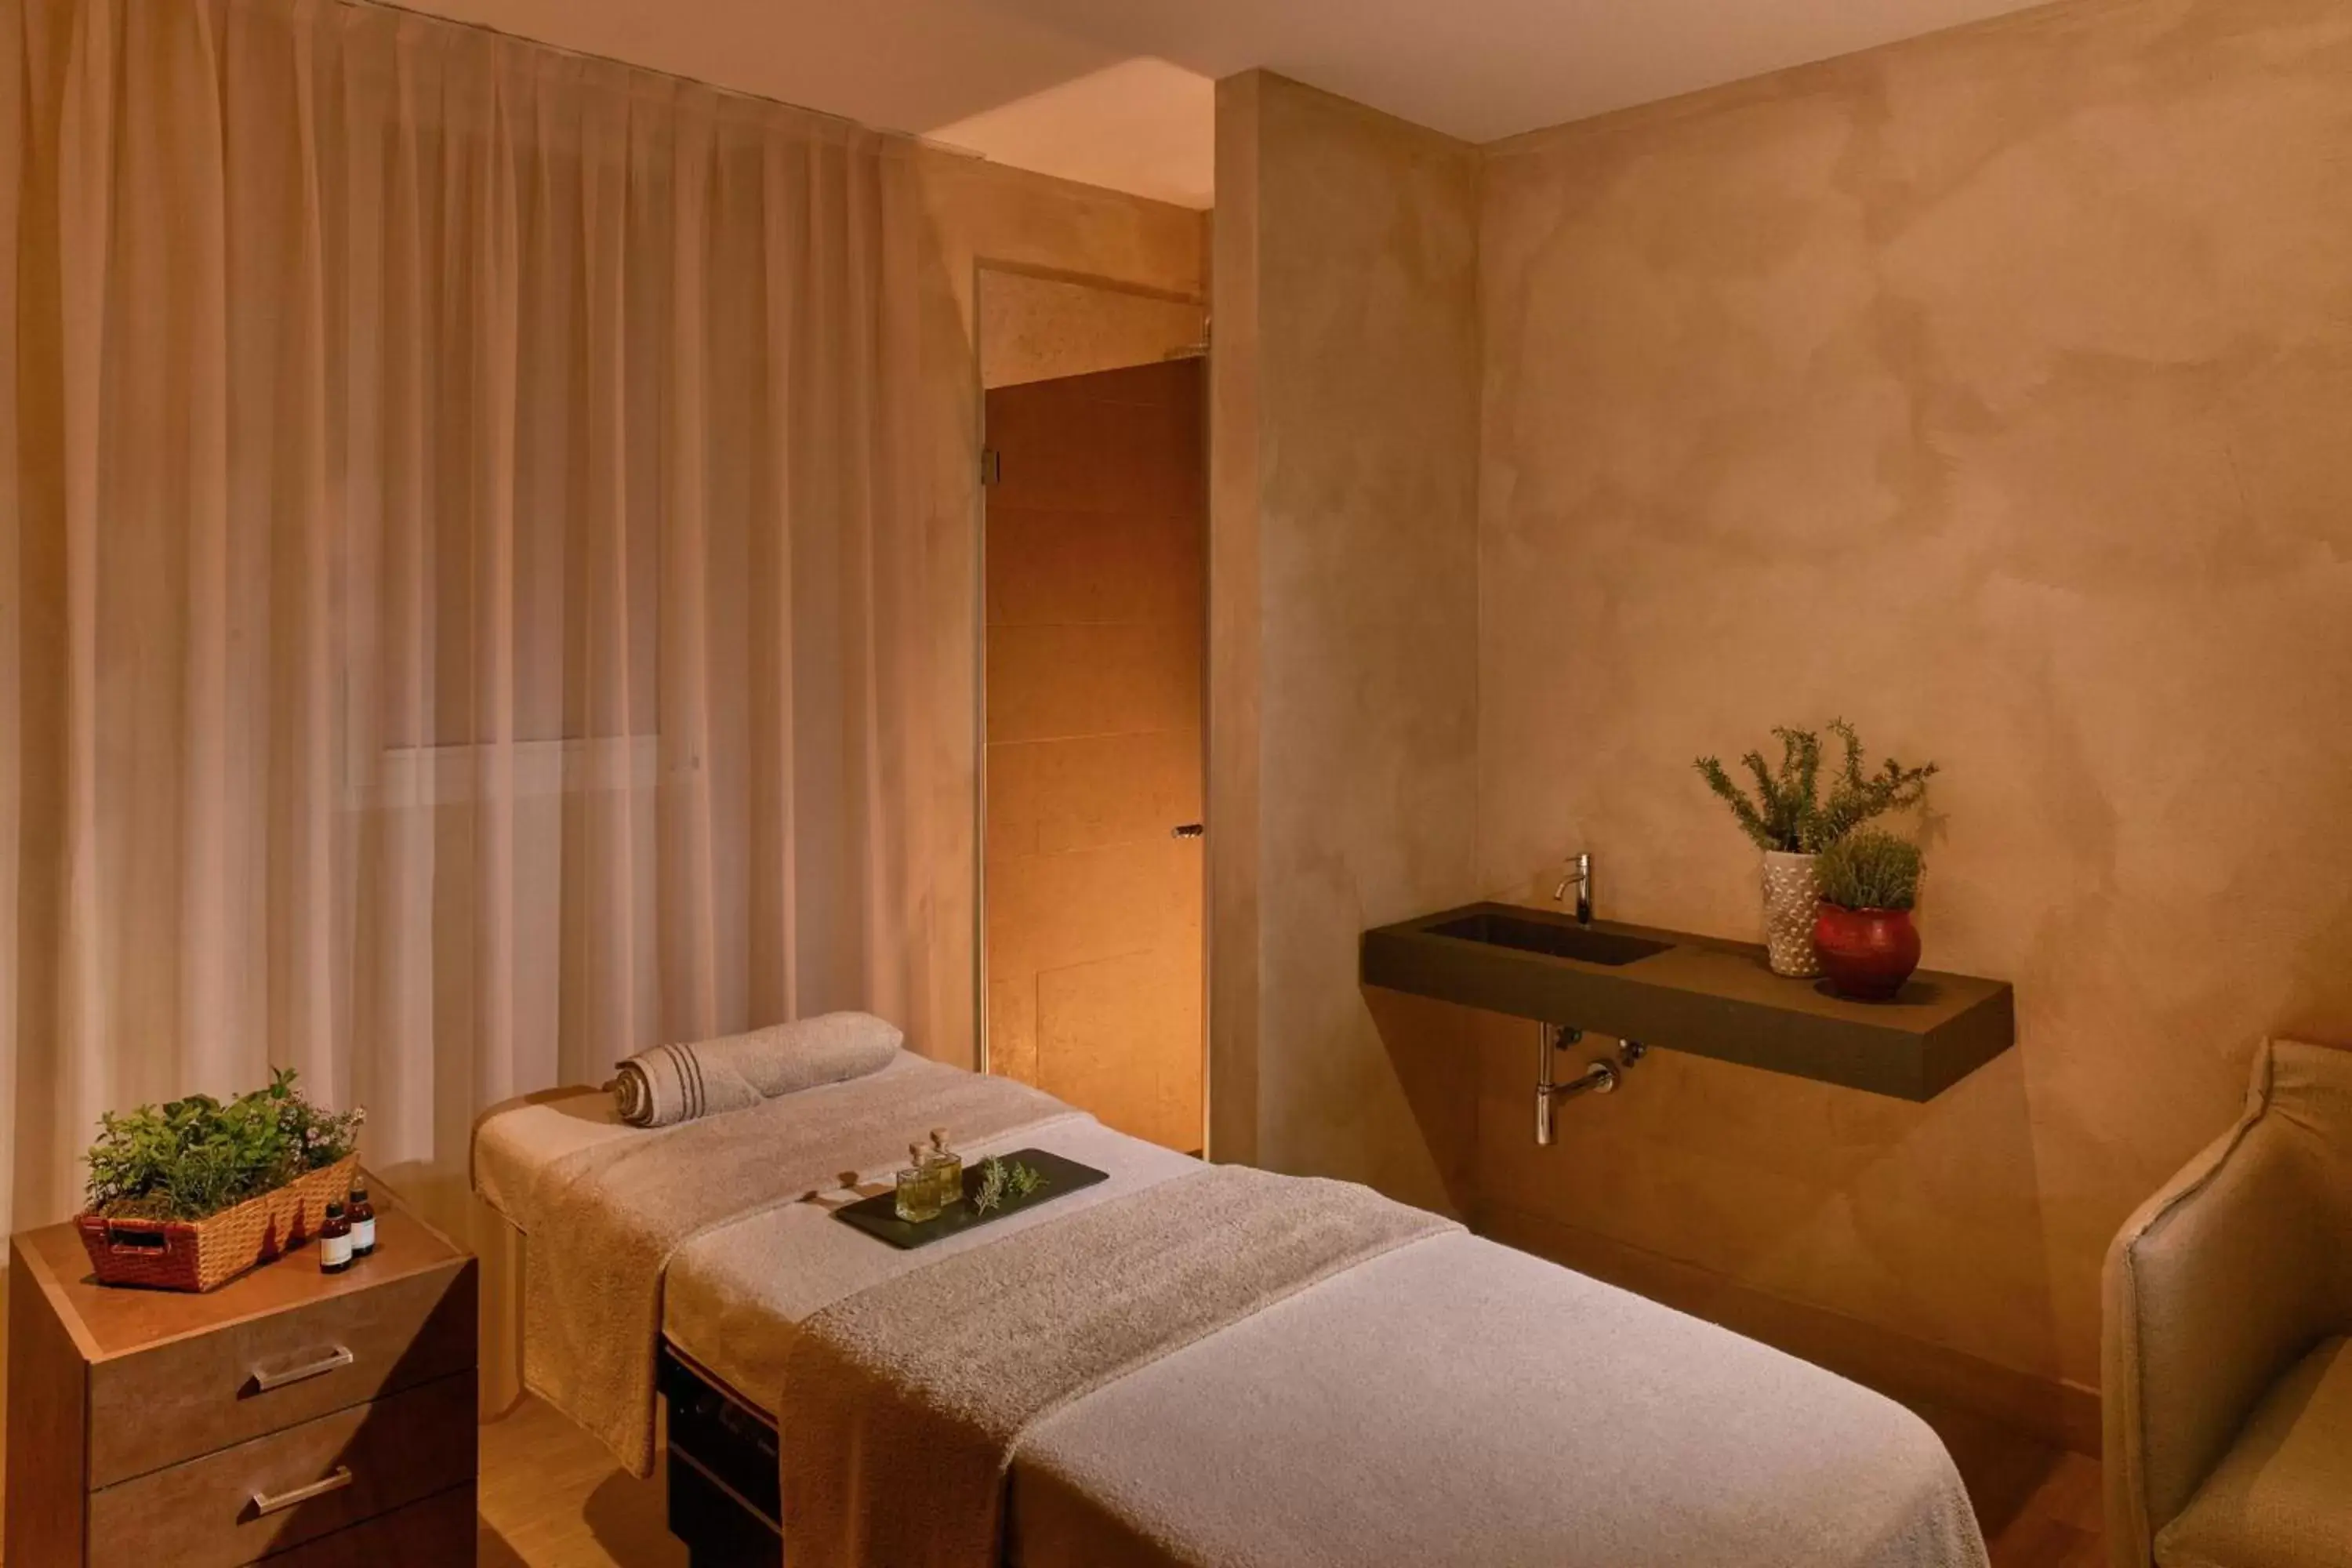 Spa and wellness centre/facilities, Spa/Wellness in Grotta Giusti Thermal Spa Resort Tuscany, Autograph Collection